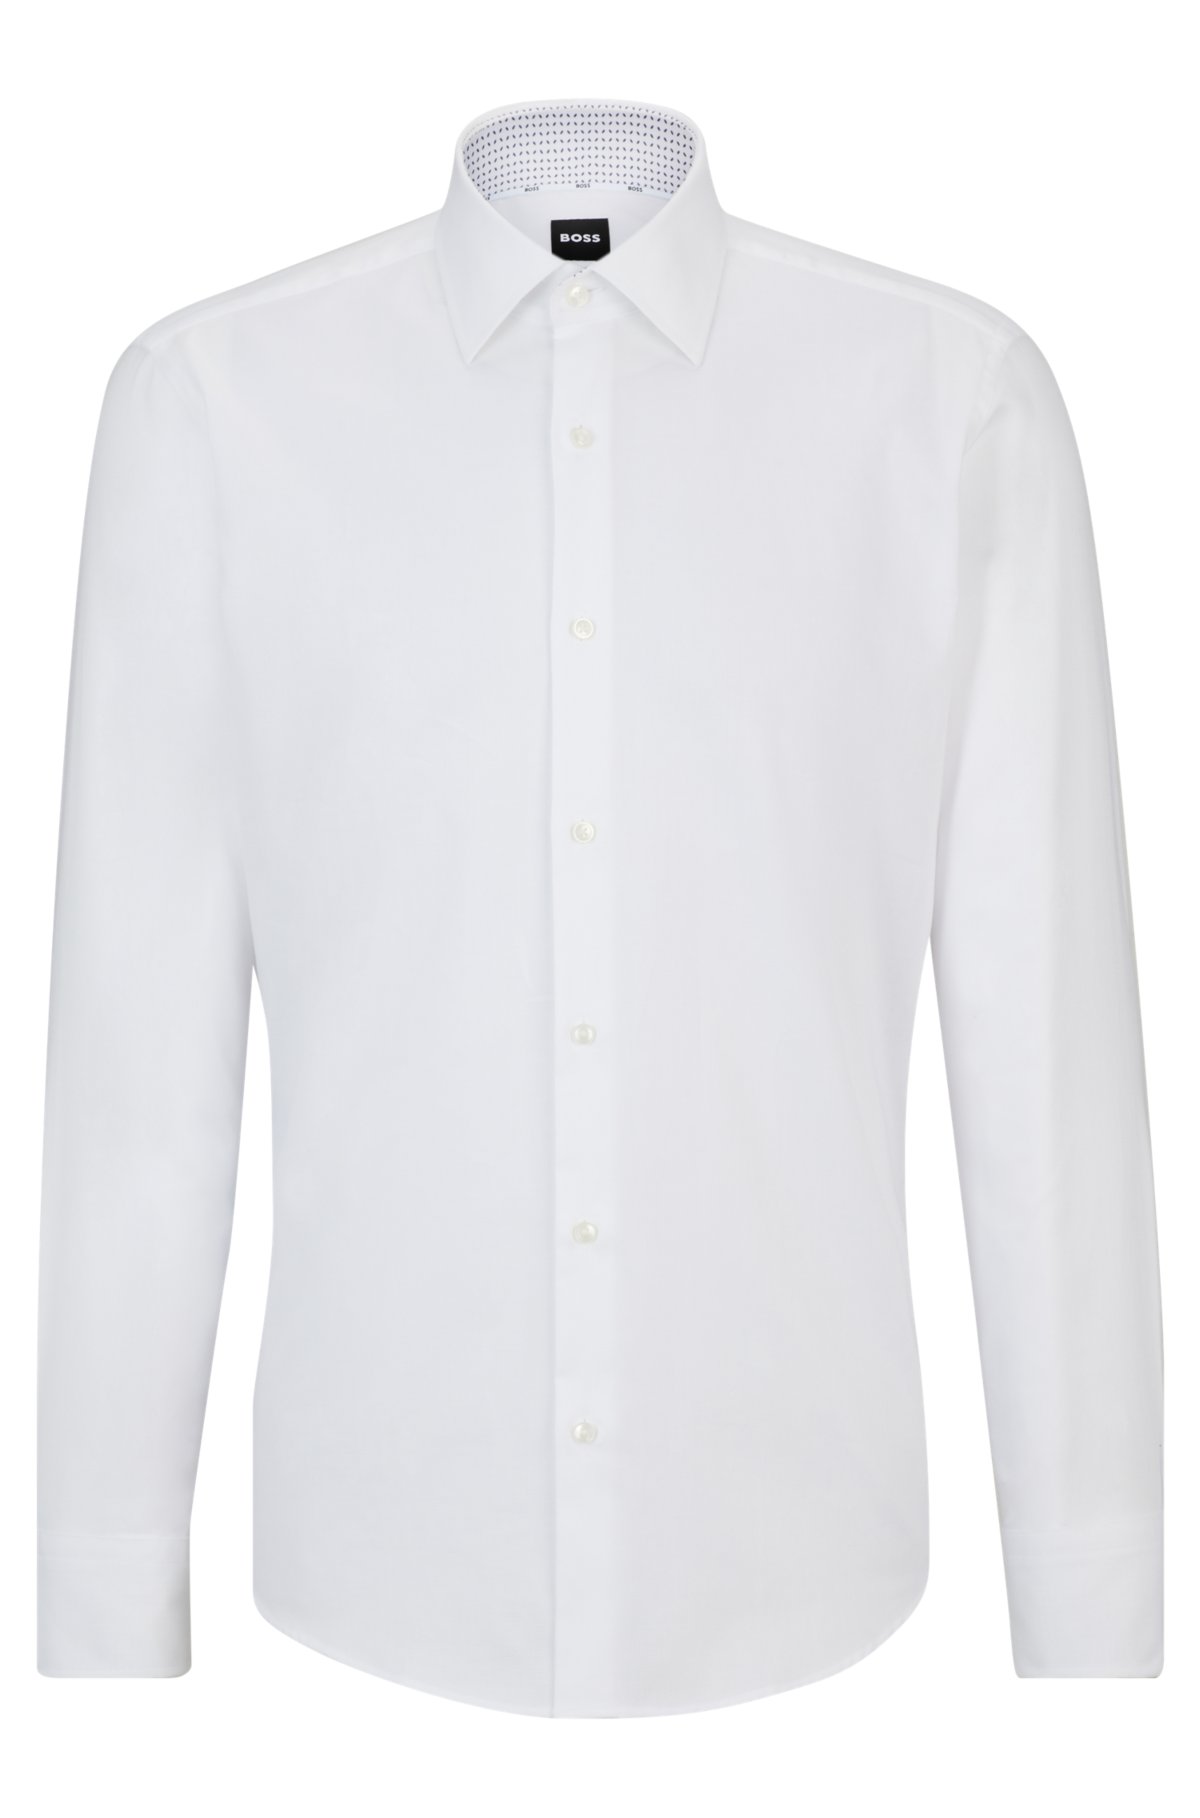 BOSS - Regular-fit shirt in cotton stretch easy-iron Oxford